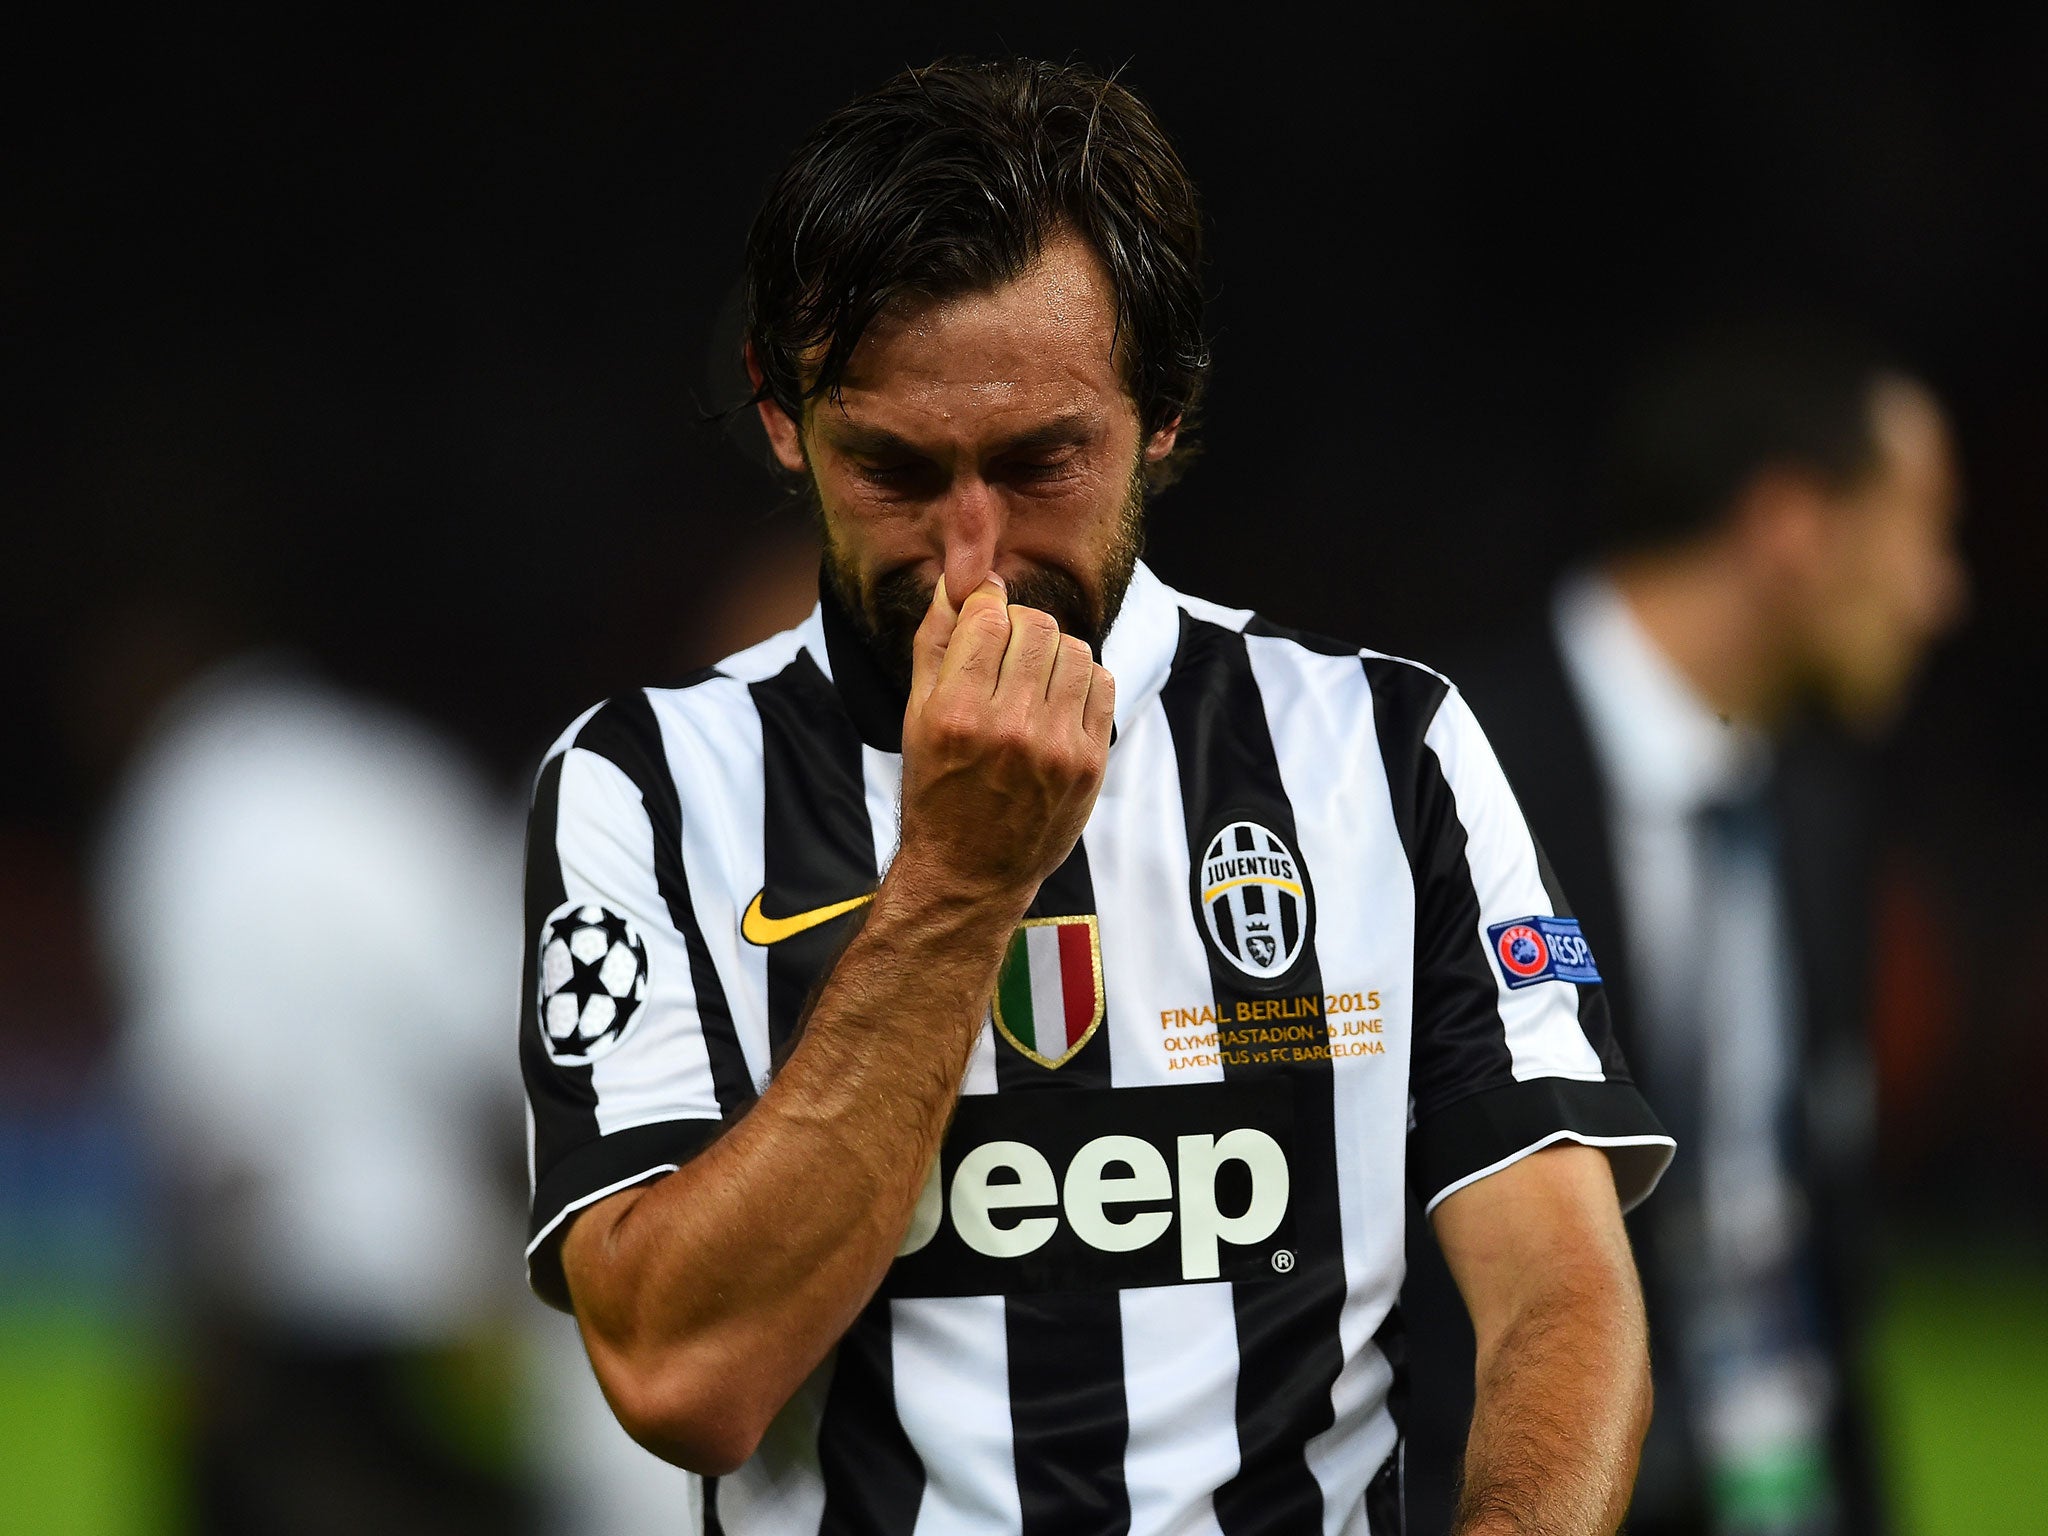 Andrea Pirlo in tears at the final whistle